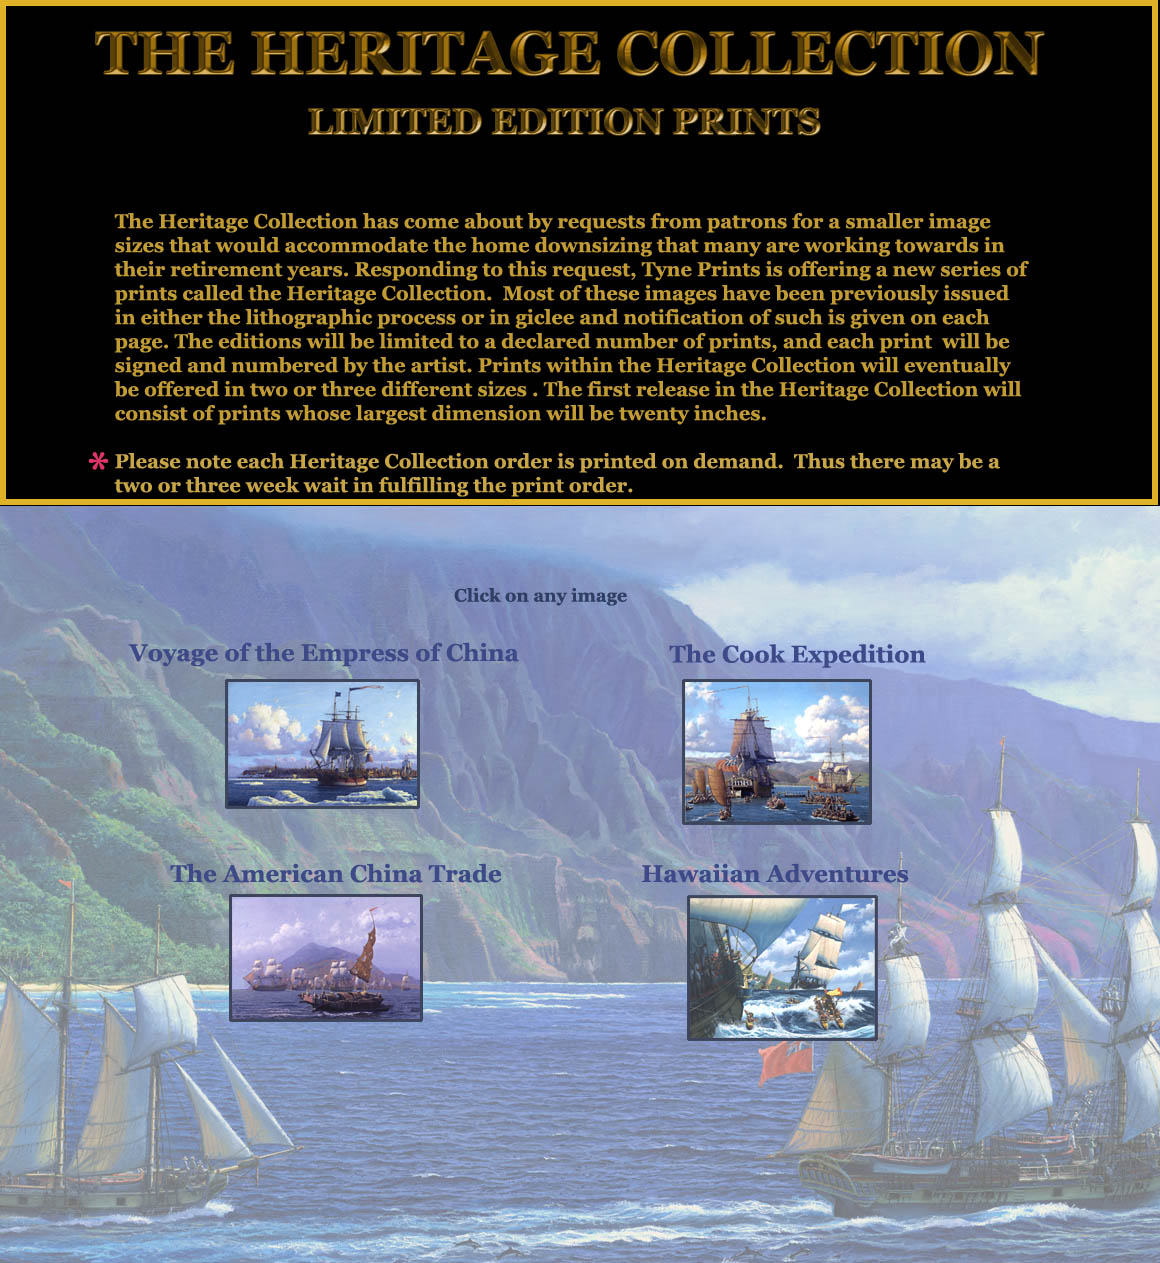 The Heritage Print Collection menu